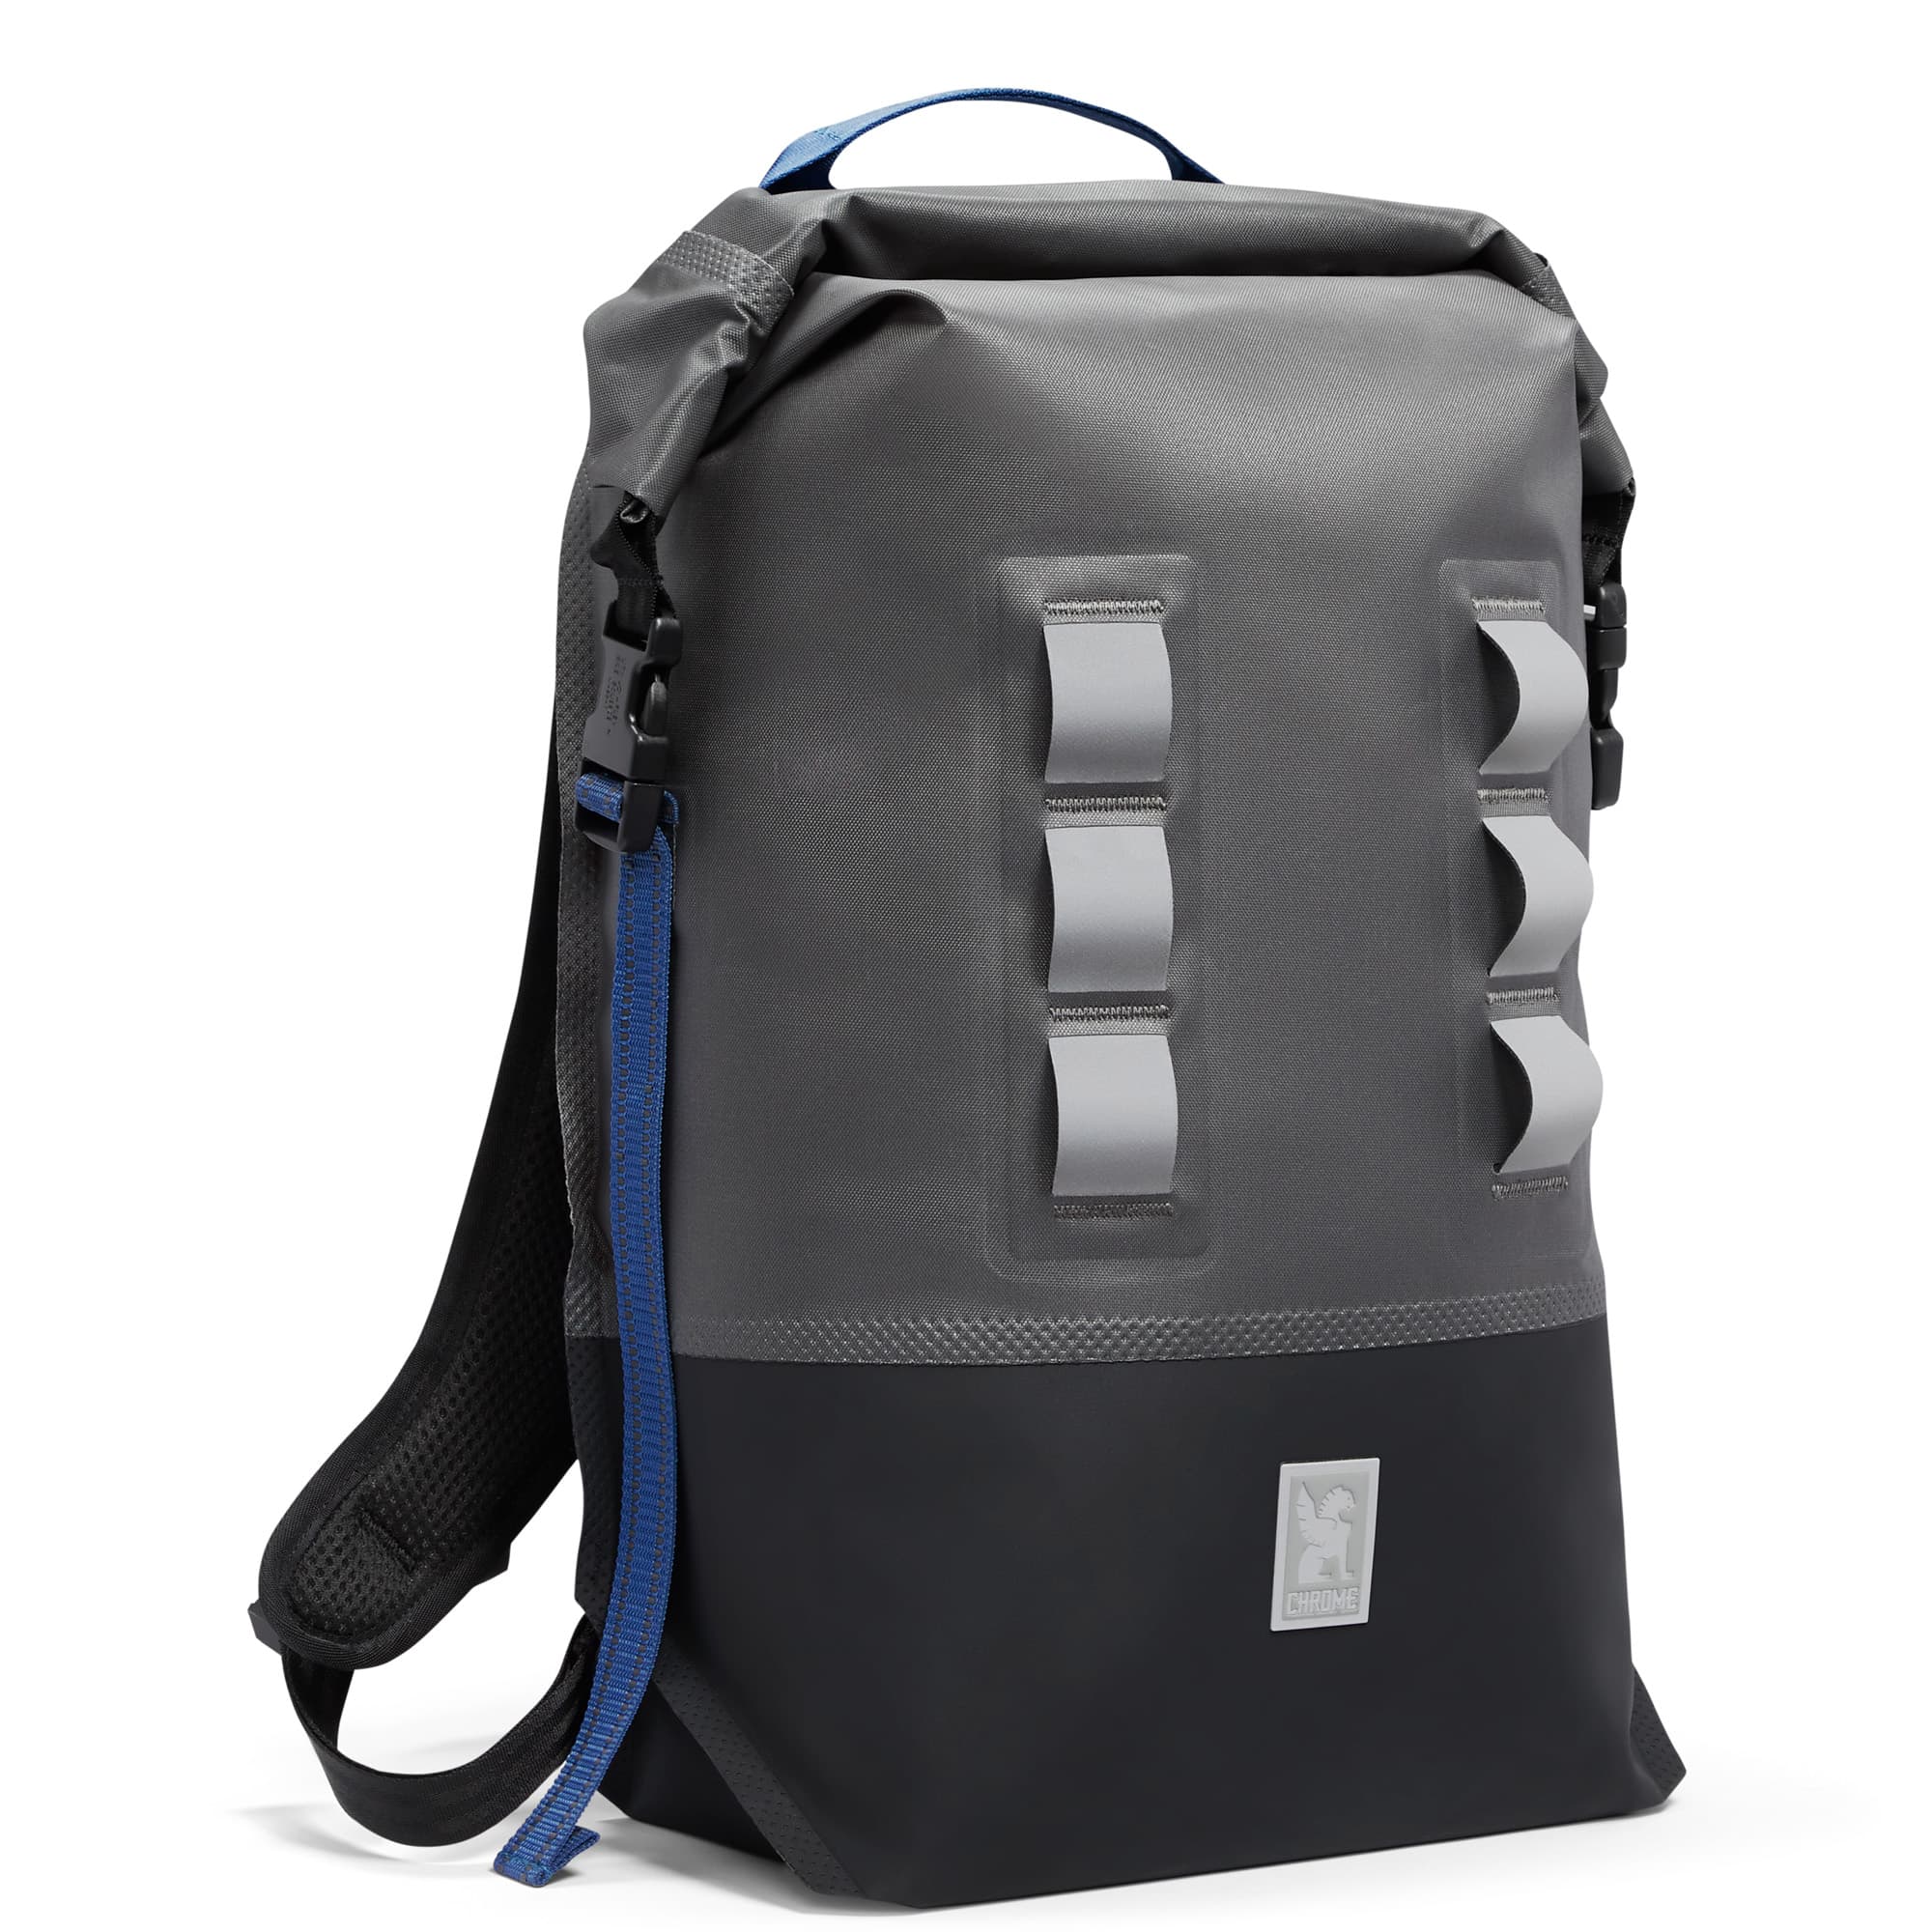 Waterproof 20L highly reflective backpack in grey #color_fog